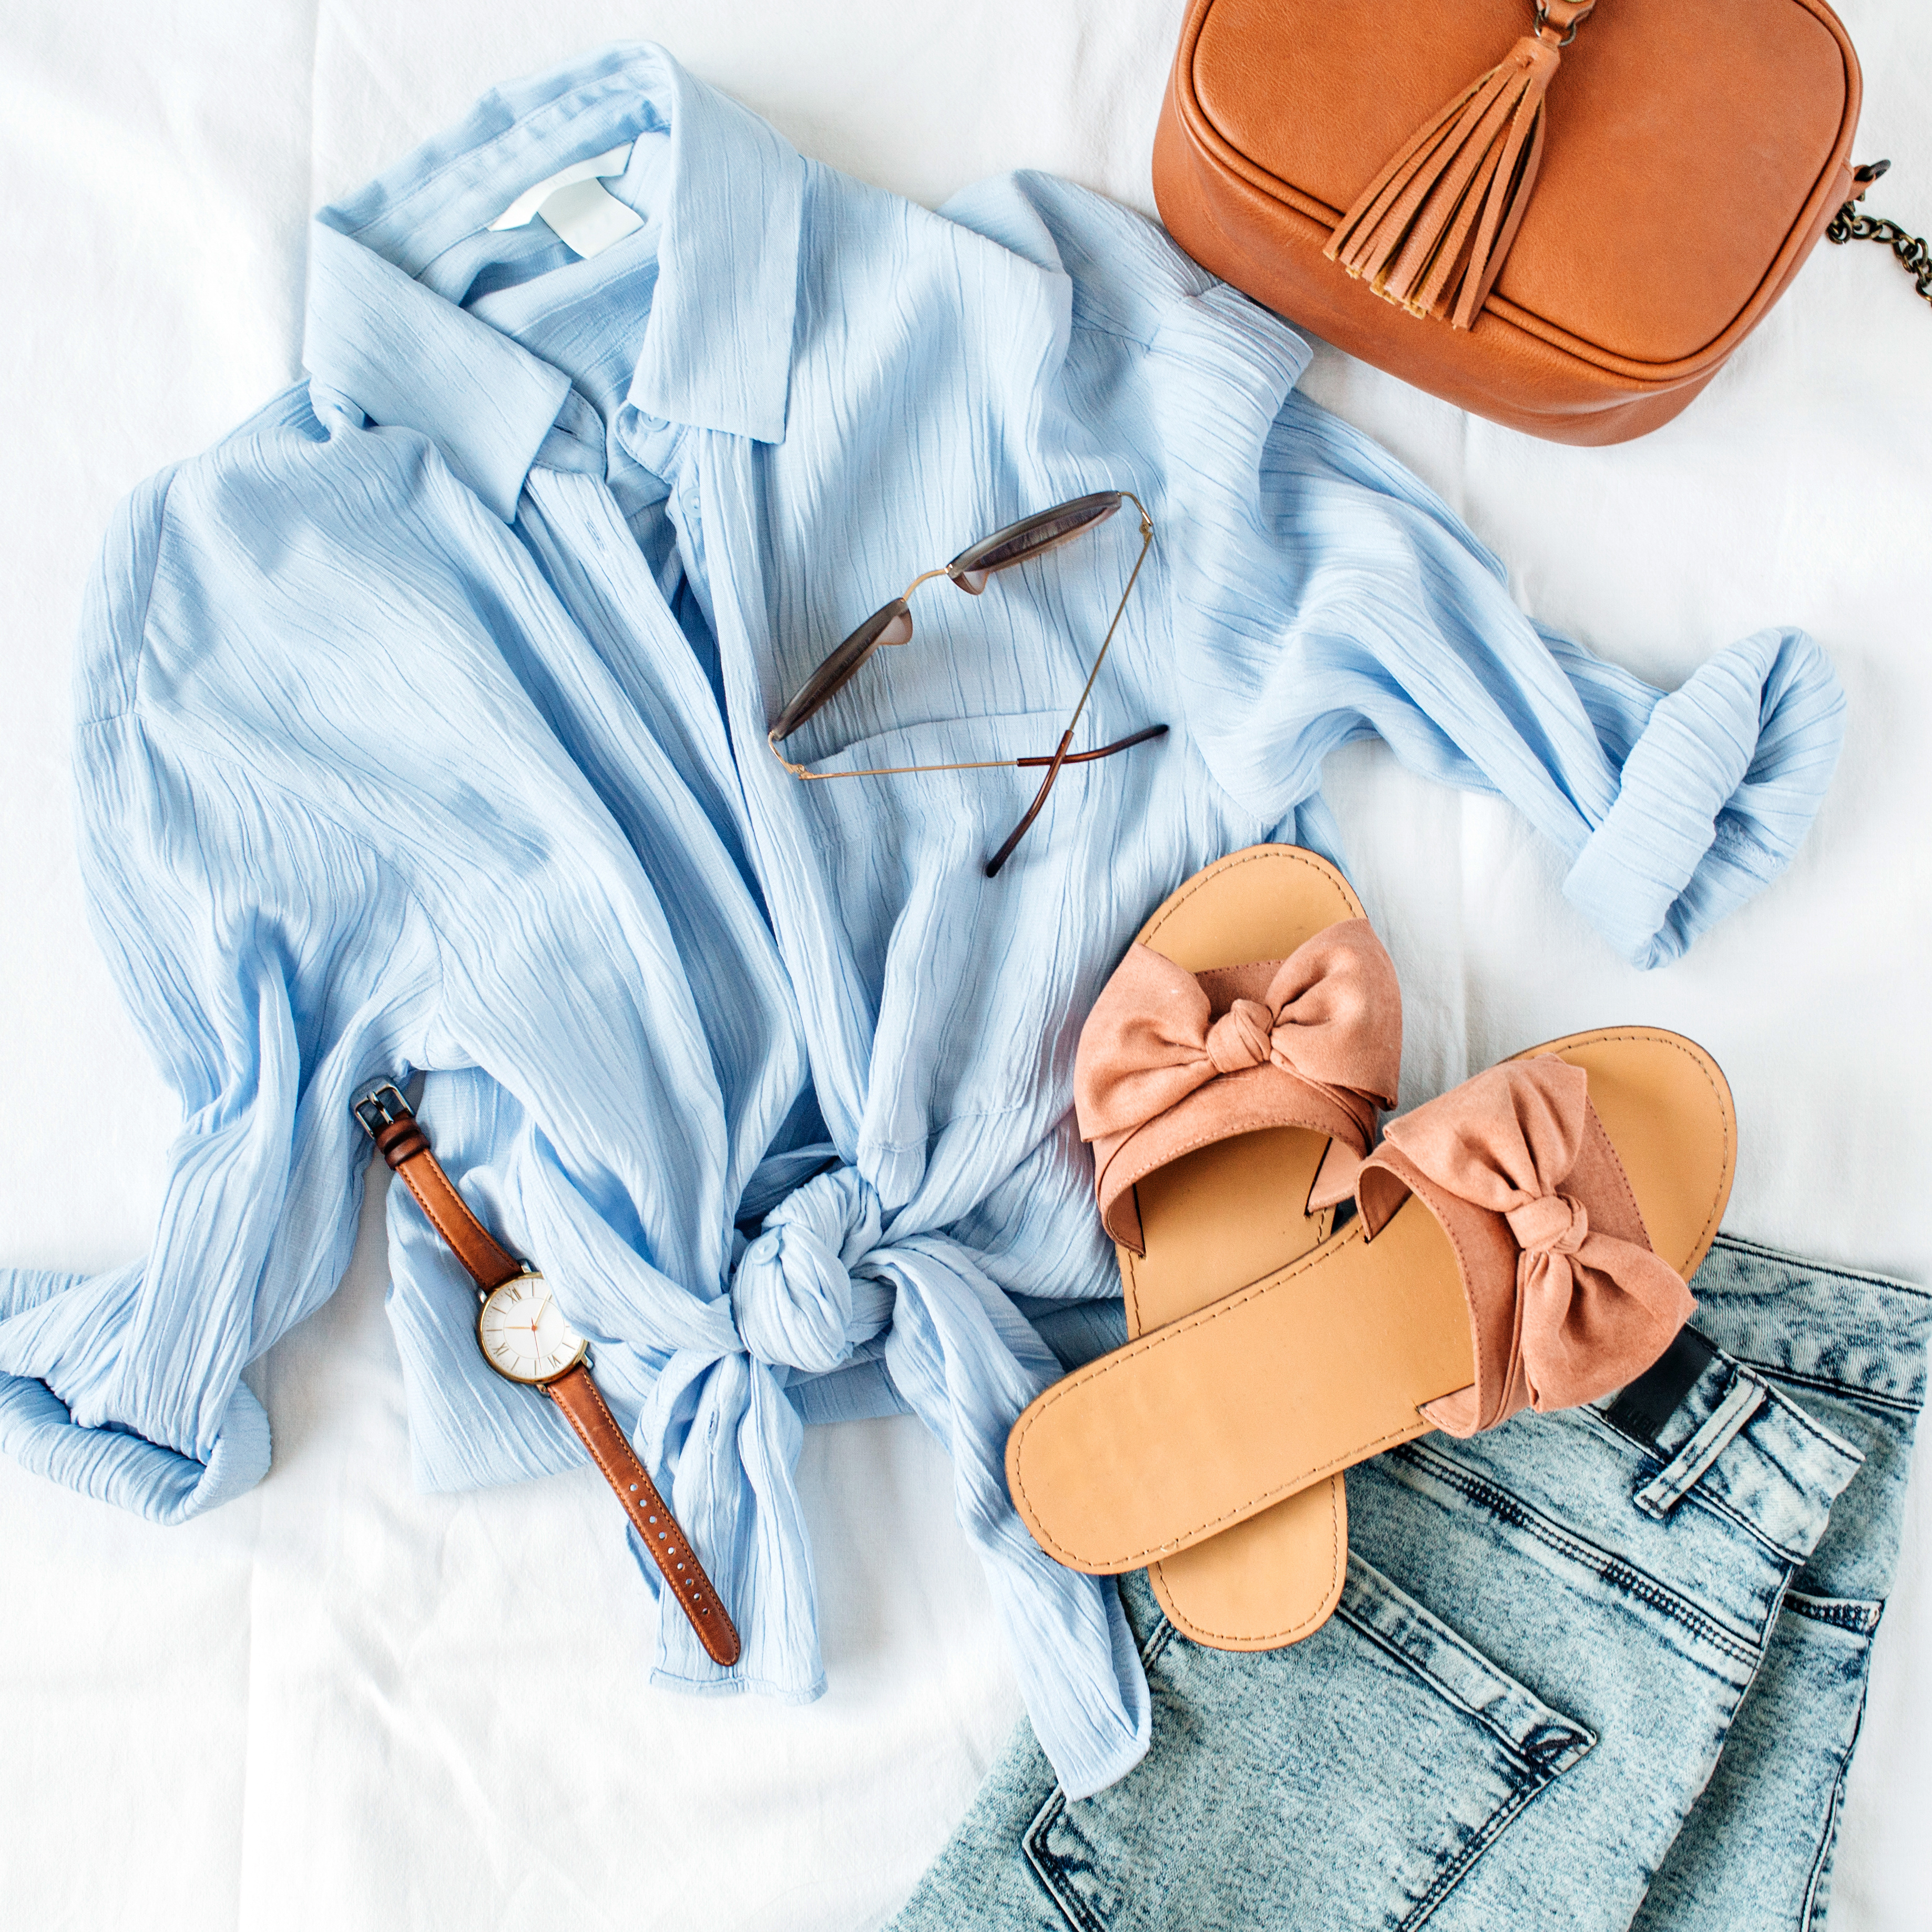 Feminine summer fashion composition with blouse, slippers, purse, sunglasses, watch, jean shorts on white background. Flat lay, top view minimalist clothes collage. Female fashion blog, social media, website concept.